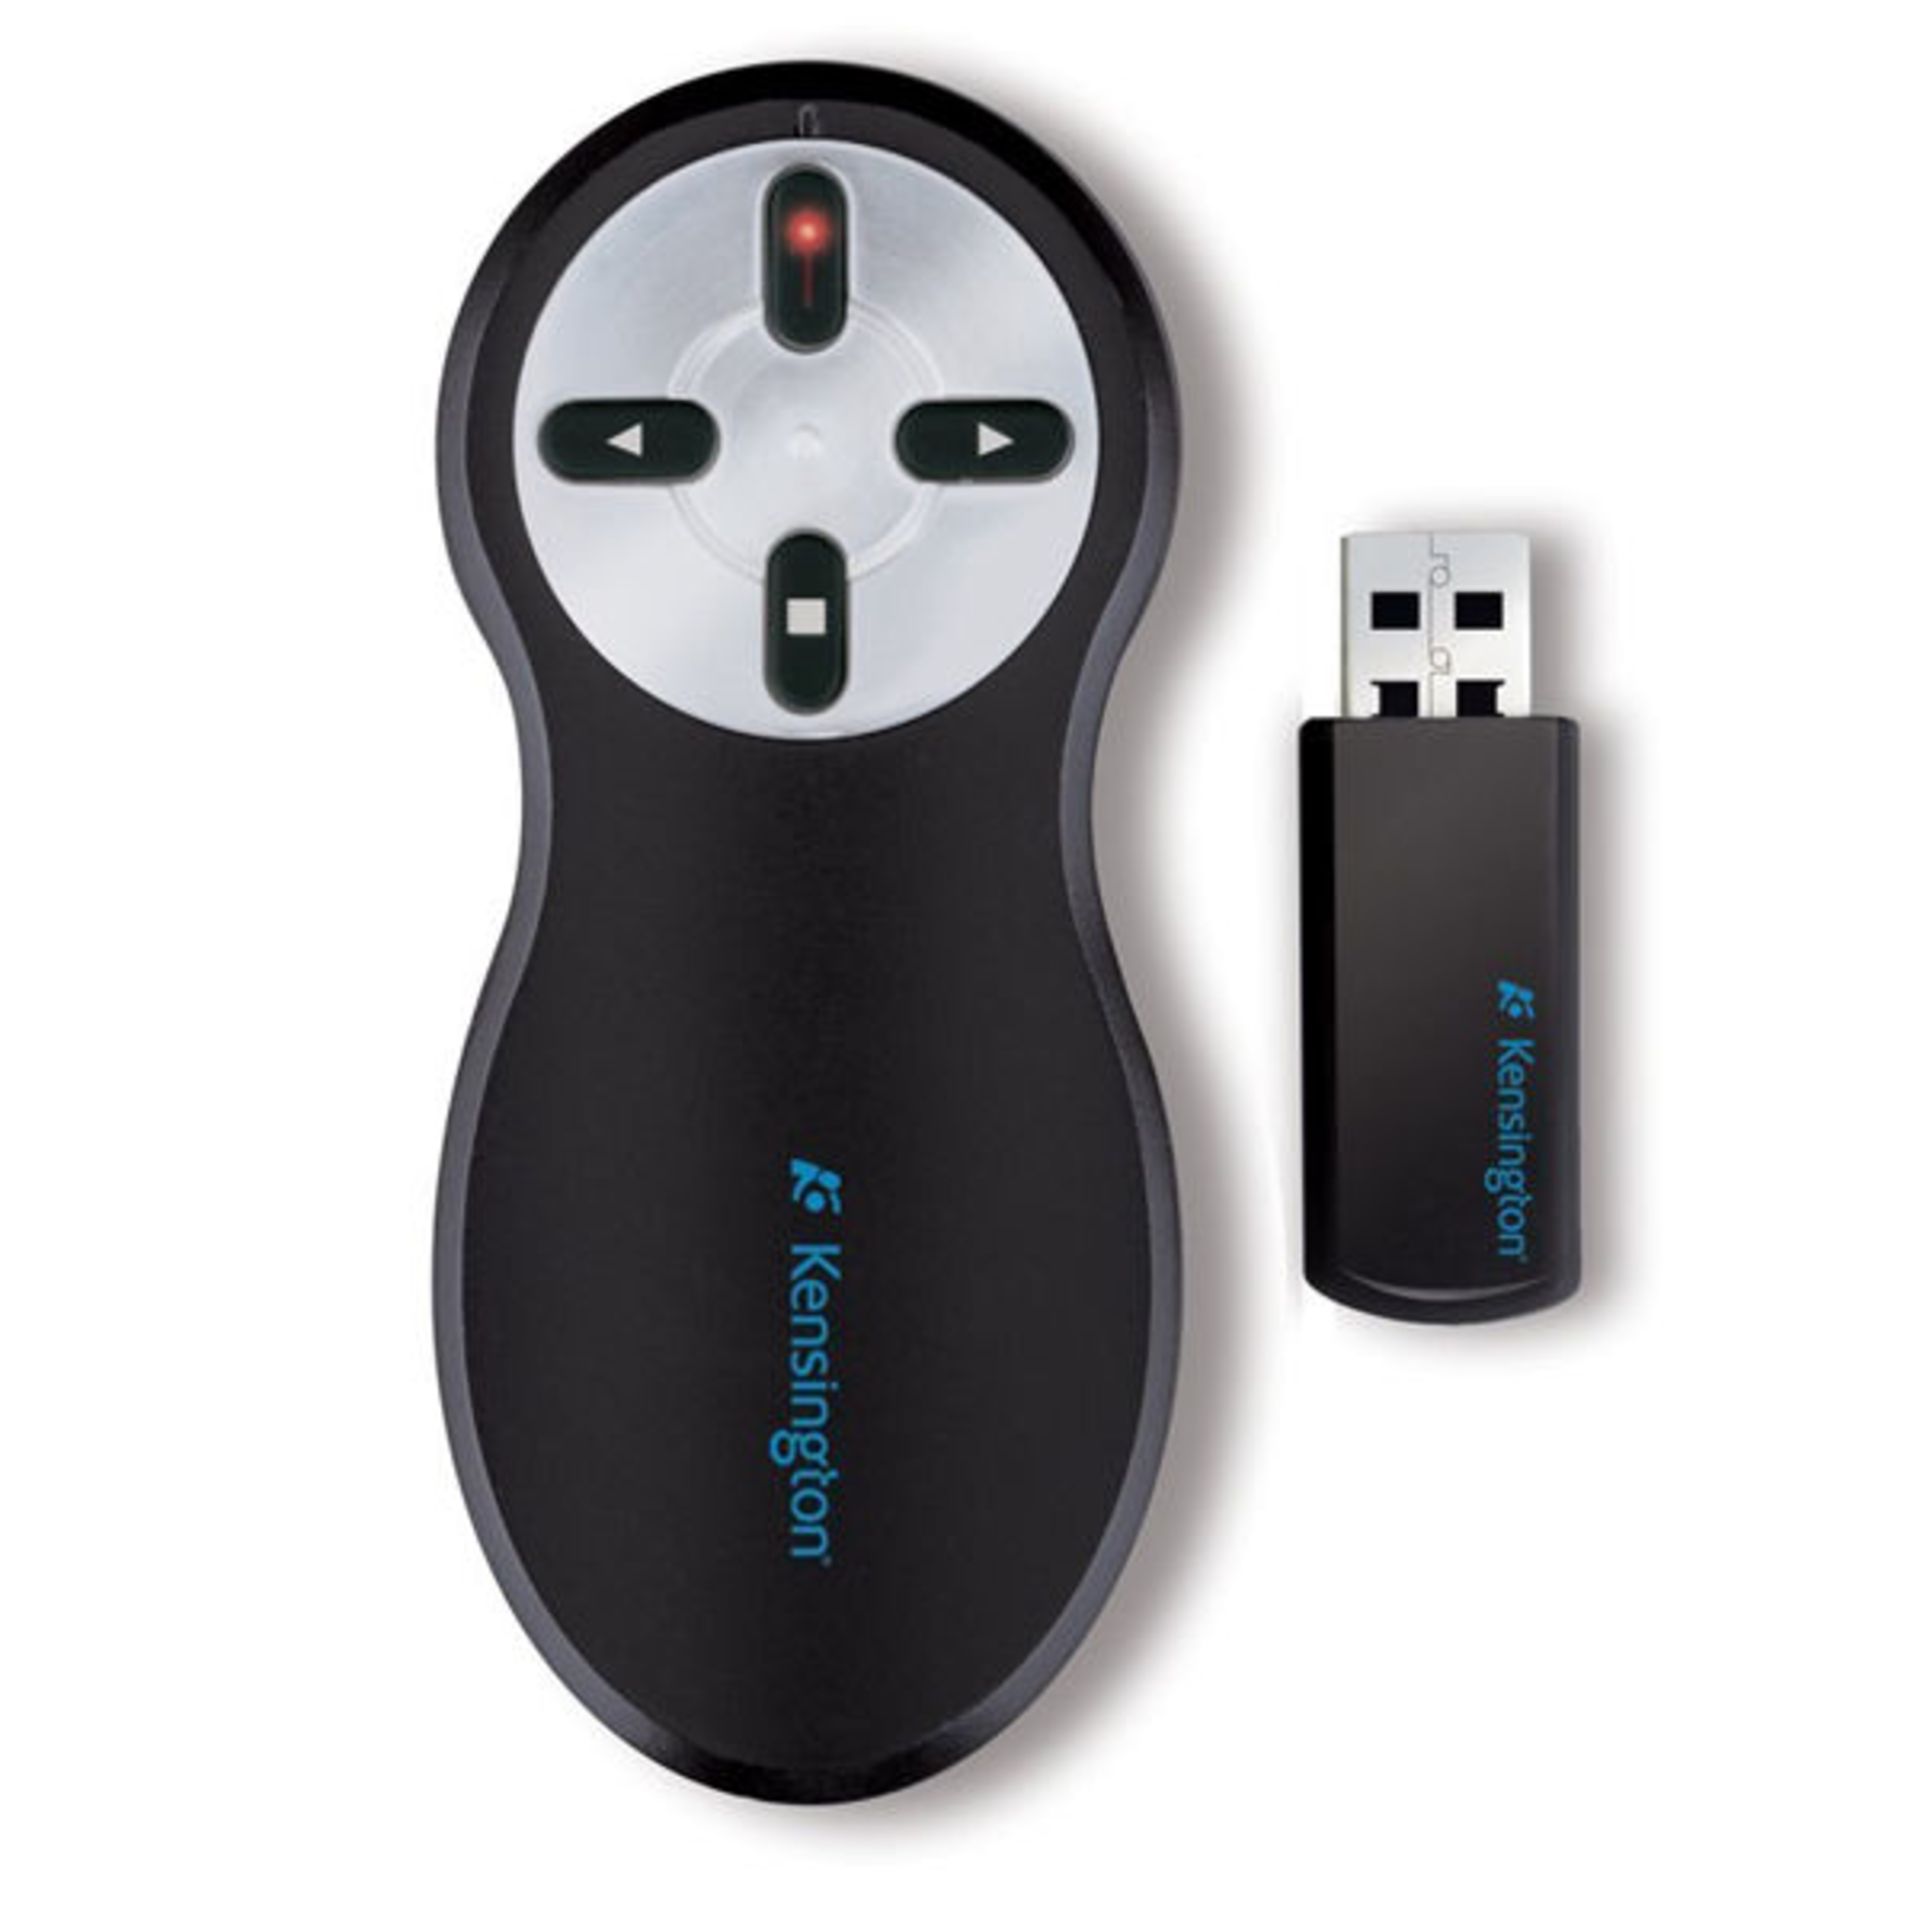 1 x Kensington Wireless Presenter Red Laser With USB Dongle - Ref: MPC822 - CL678 - Location: